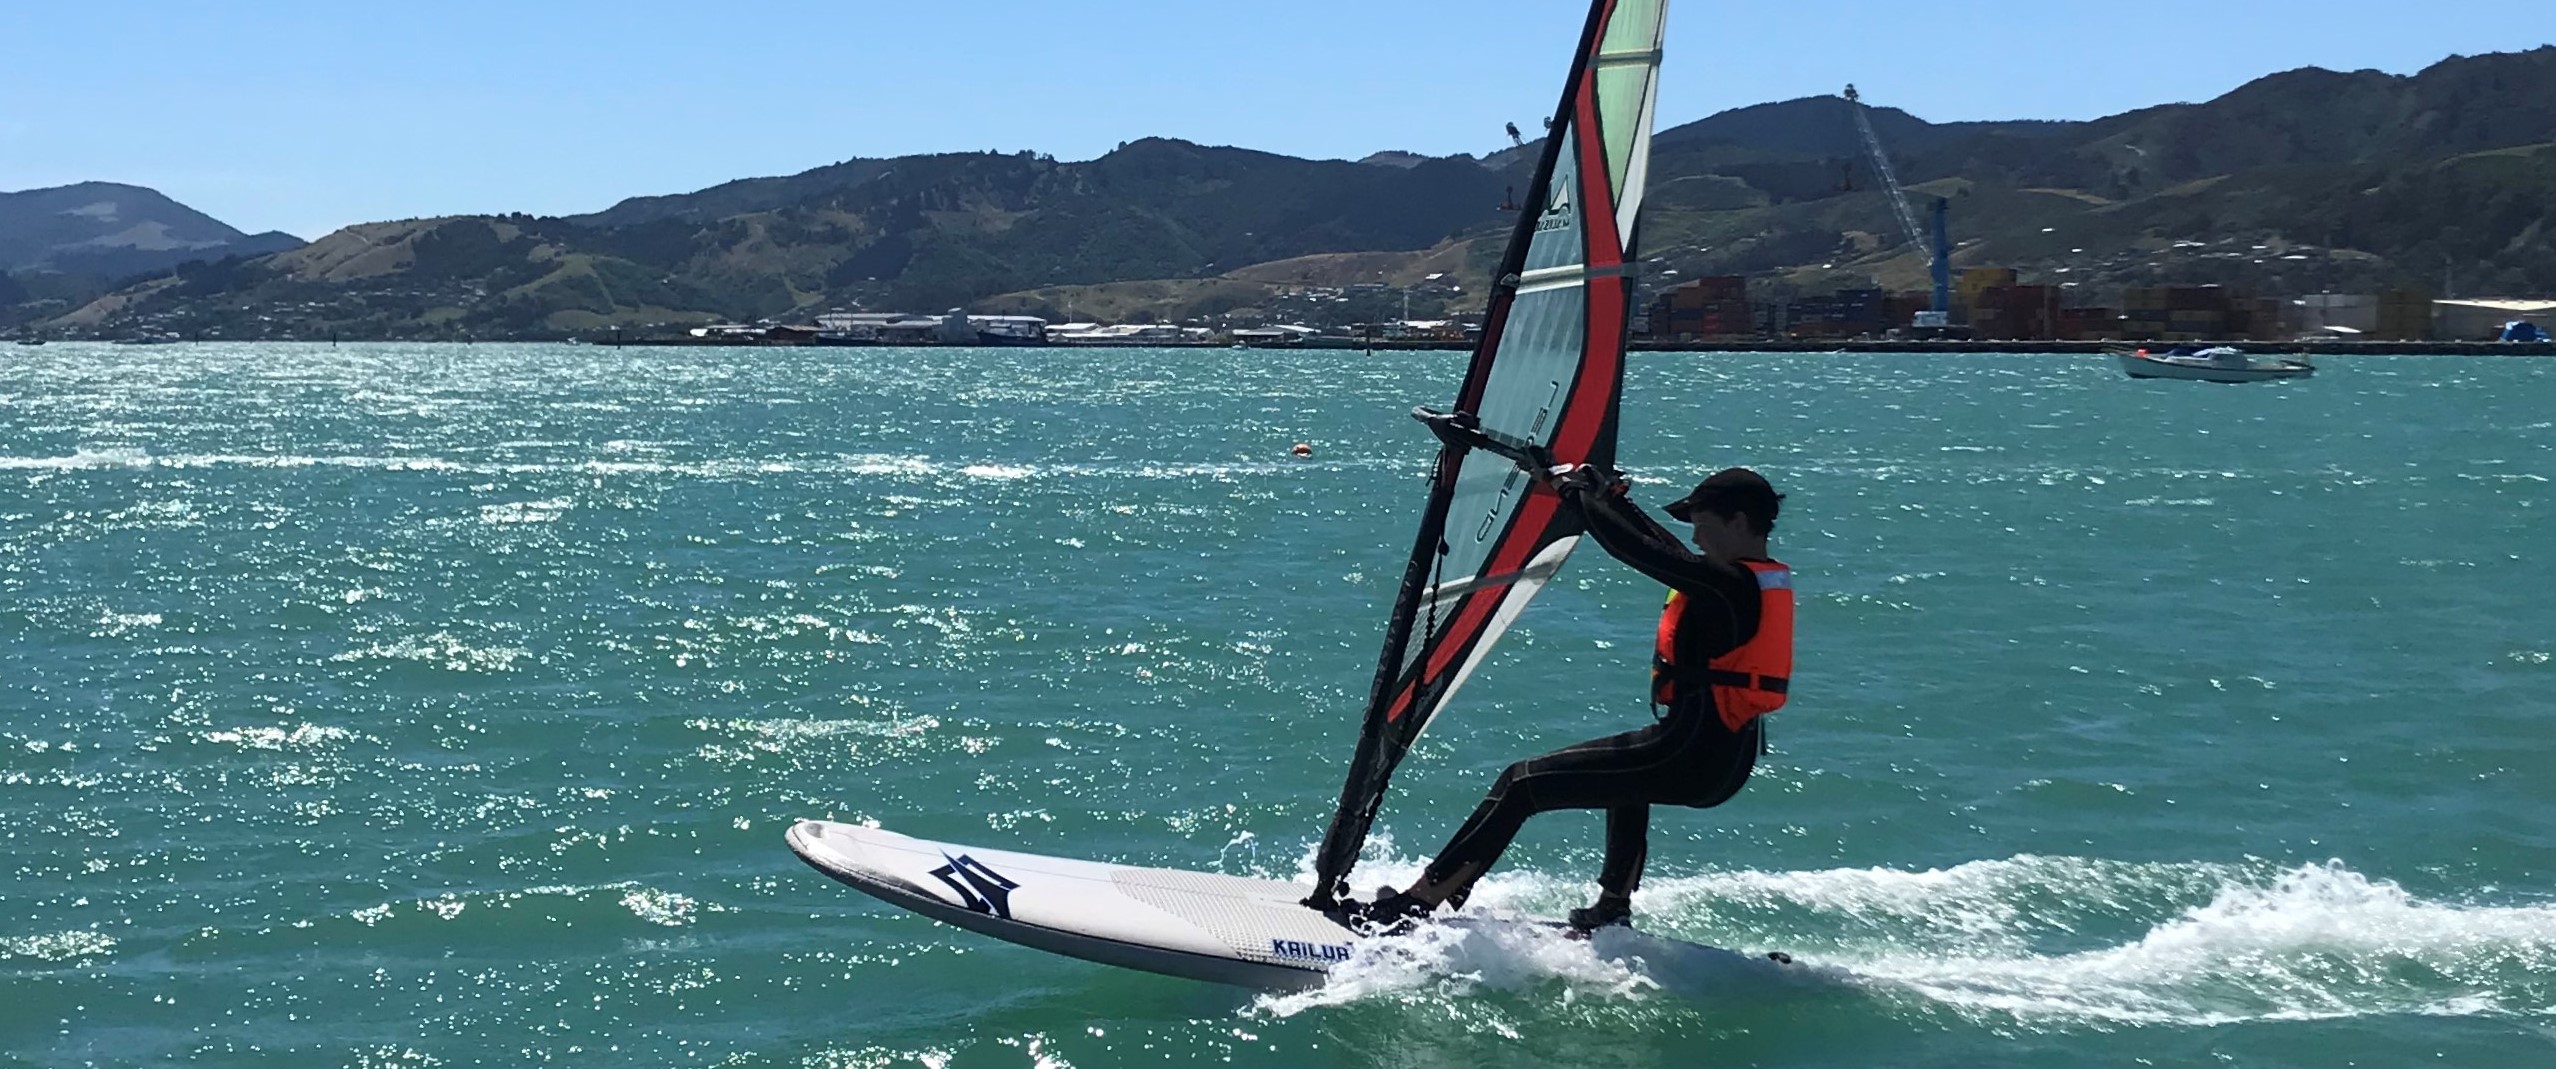 youth windsurfer getting planing in strong winds